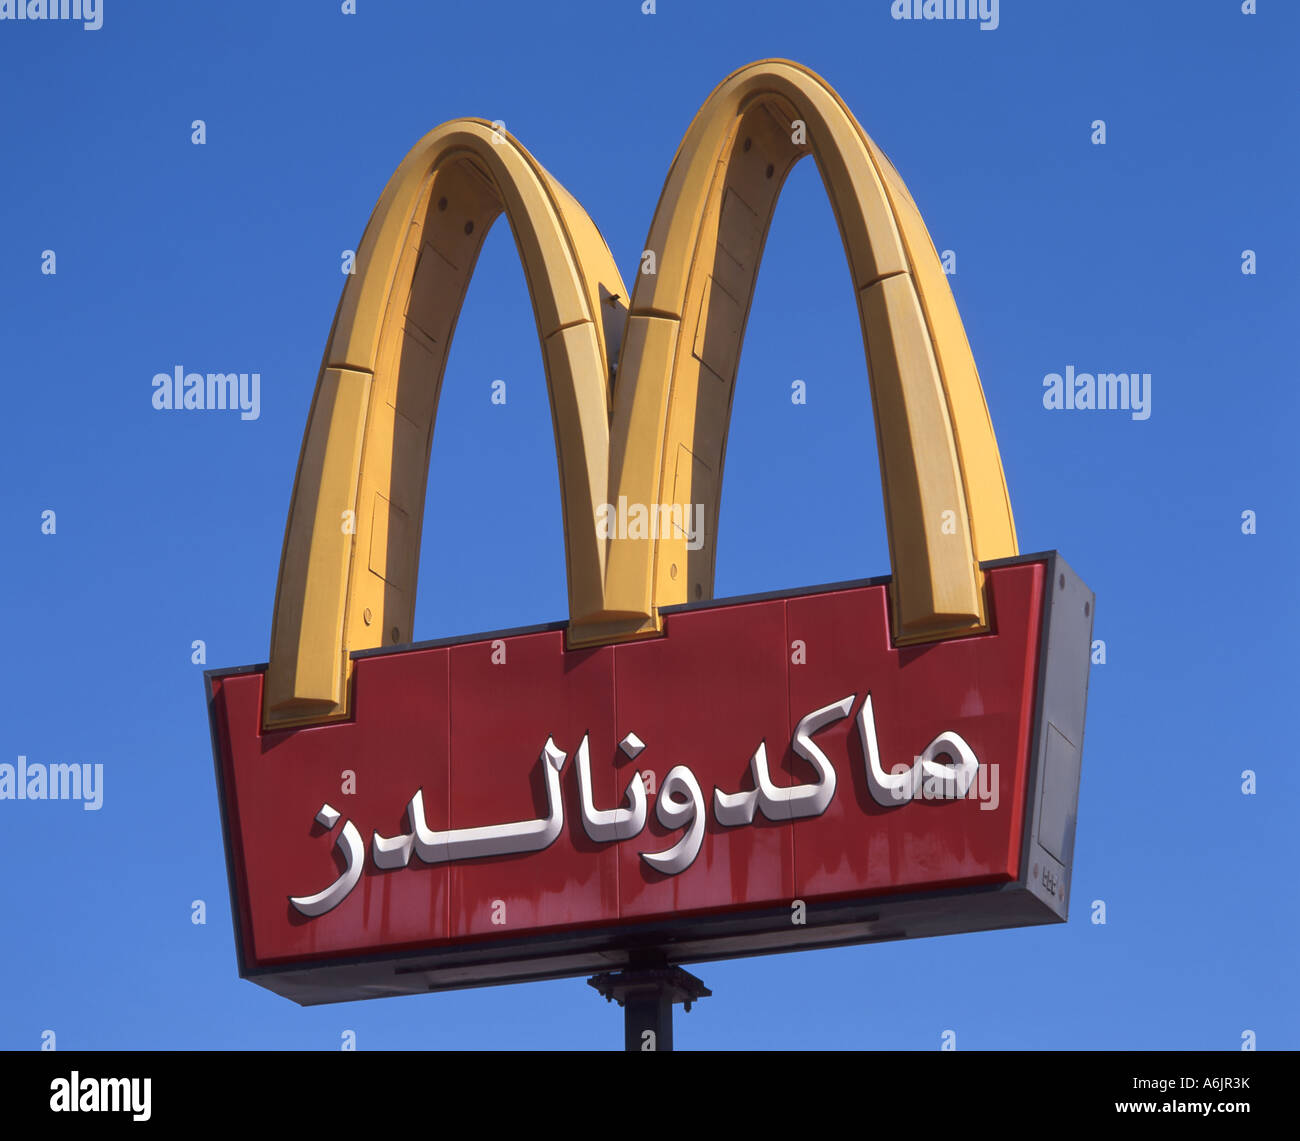 McDonald's Fast Food Restaurant advertising sign, Muscat, Masqat Governorate, Sultanate of Oman Stock Photo